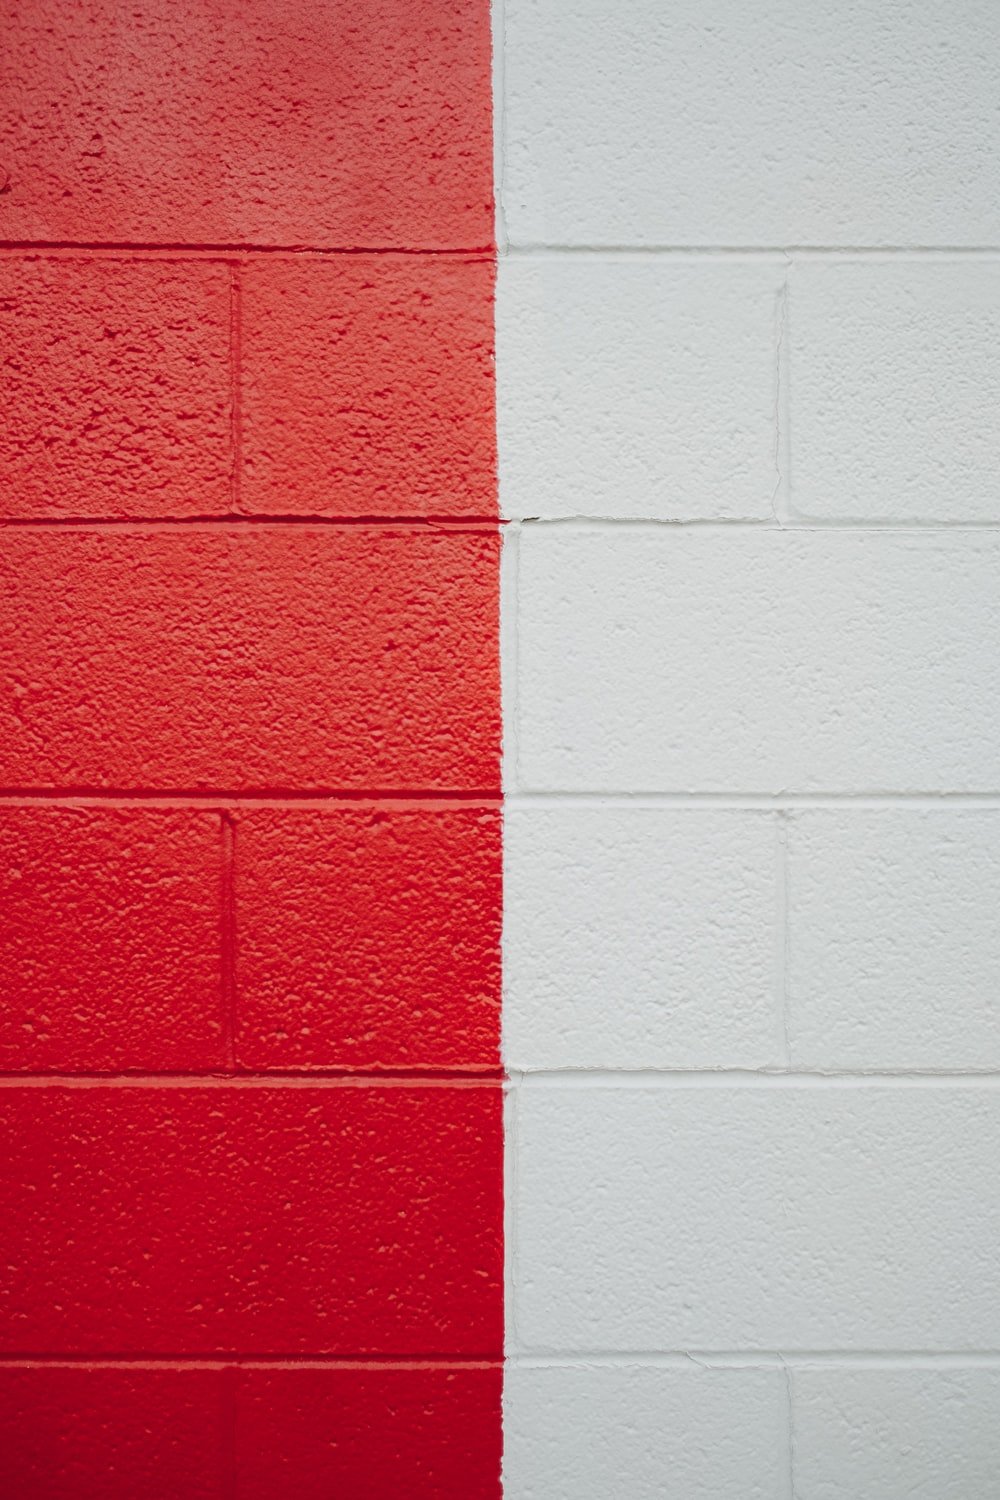 Red Wall Picture. Download Free Image